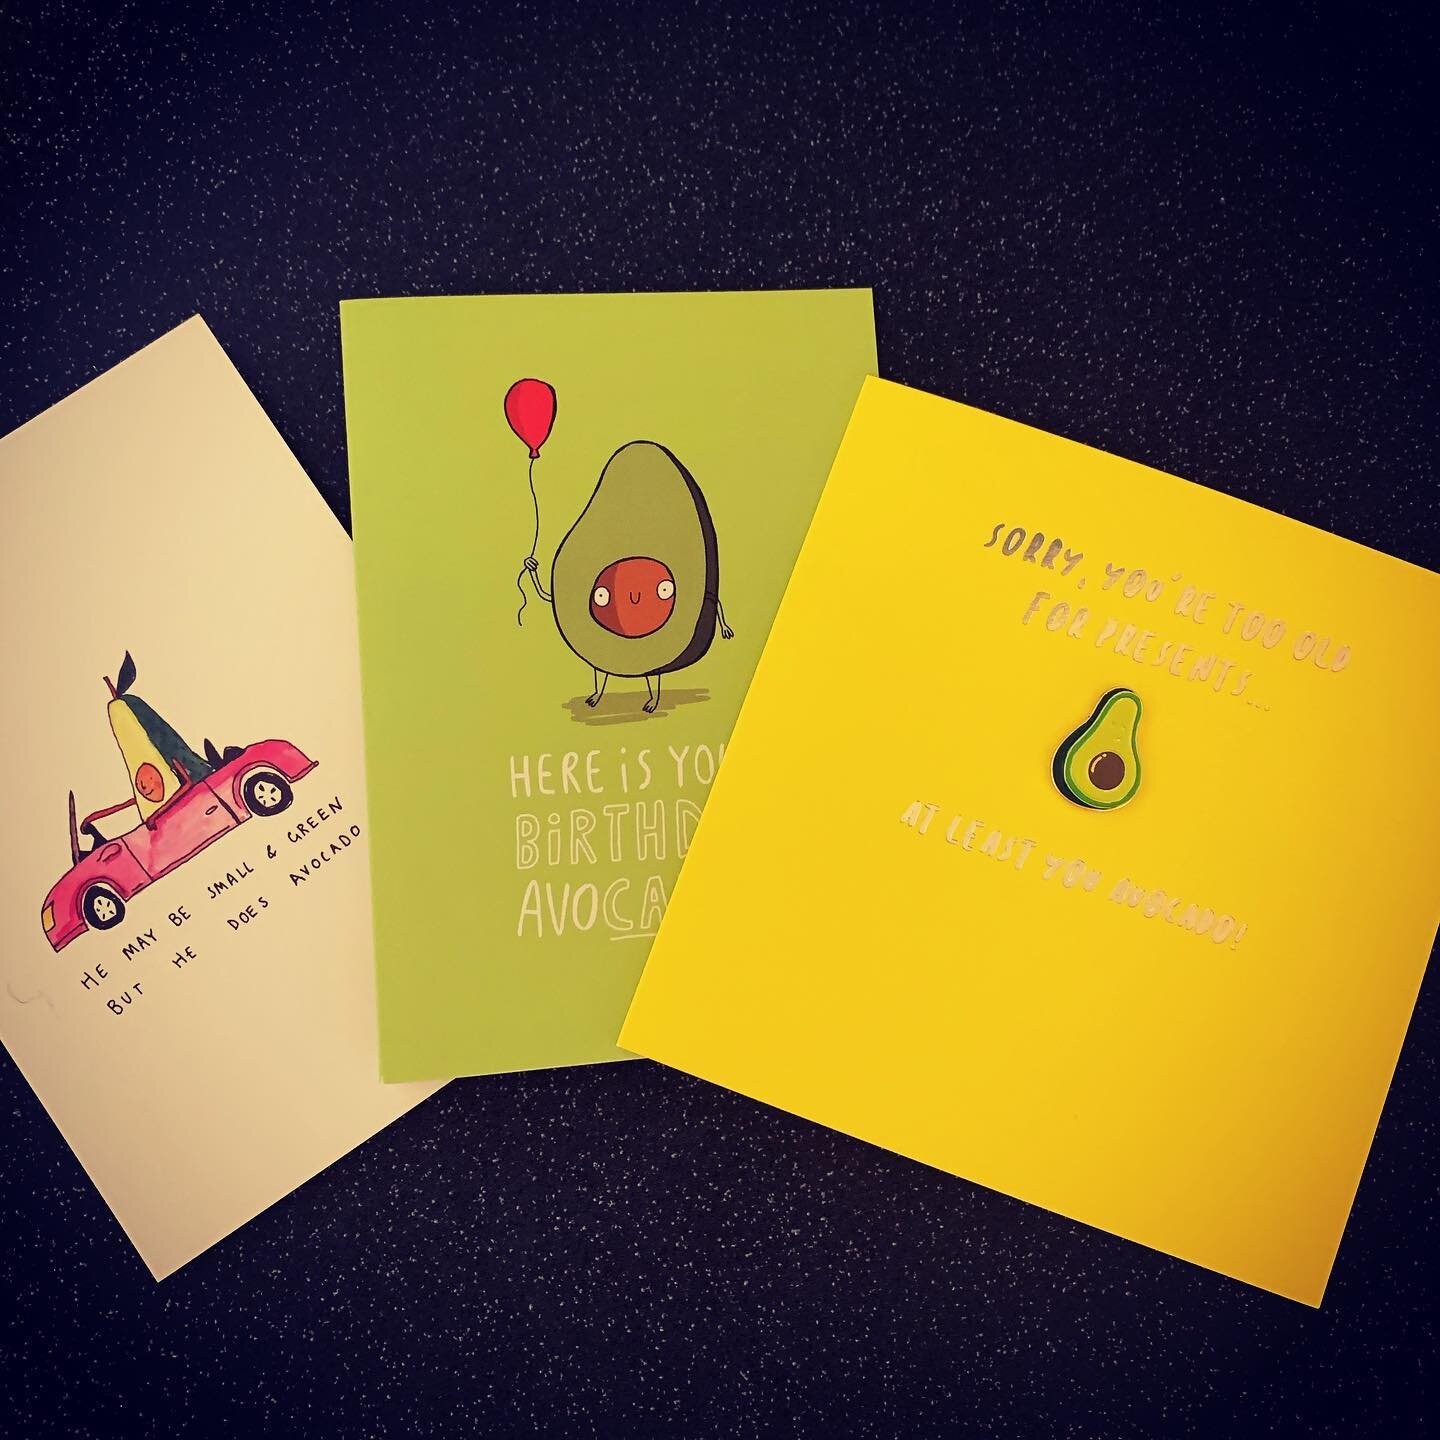 It&rsquo;s Founder Jess&rsquo; birthday today! Lots of #avocado cards as per 🙄 (she loves it really!). Thanks so much to everyone for their well wishes! #avomarketing